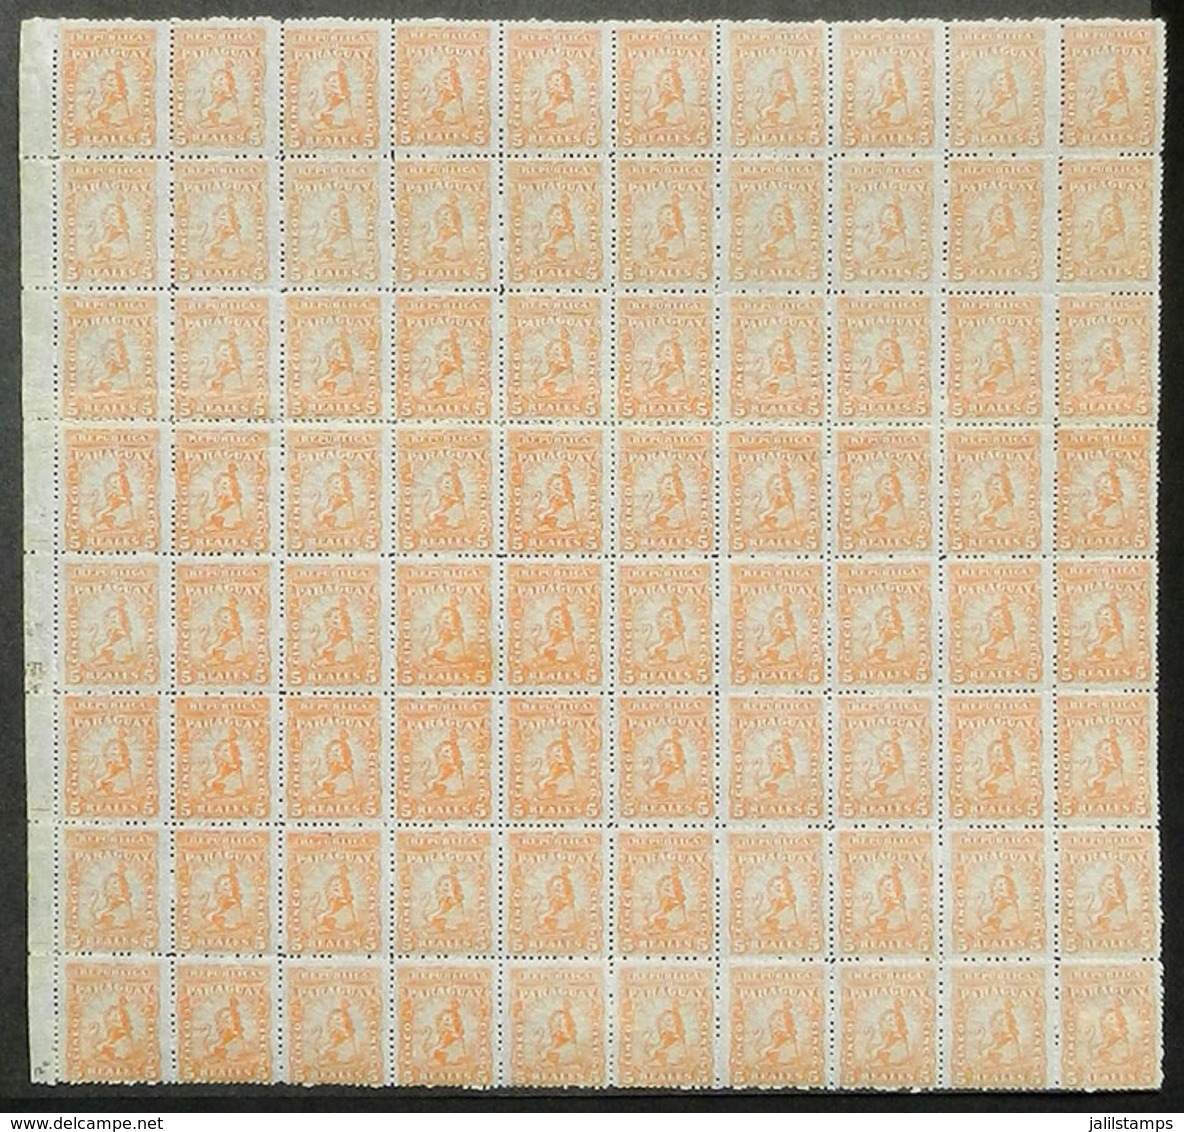 PARAGUAY: Sc.12, 1879/81 Lion 5R. Orange, Large Block Of 80 Stamps, MNH (about 20 With Hinges Reinforcing The Perforatio - Paraguay